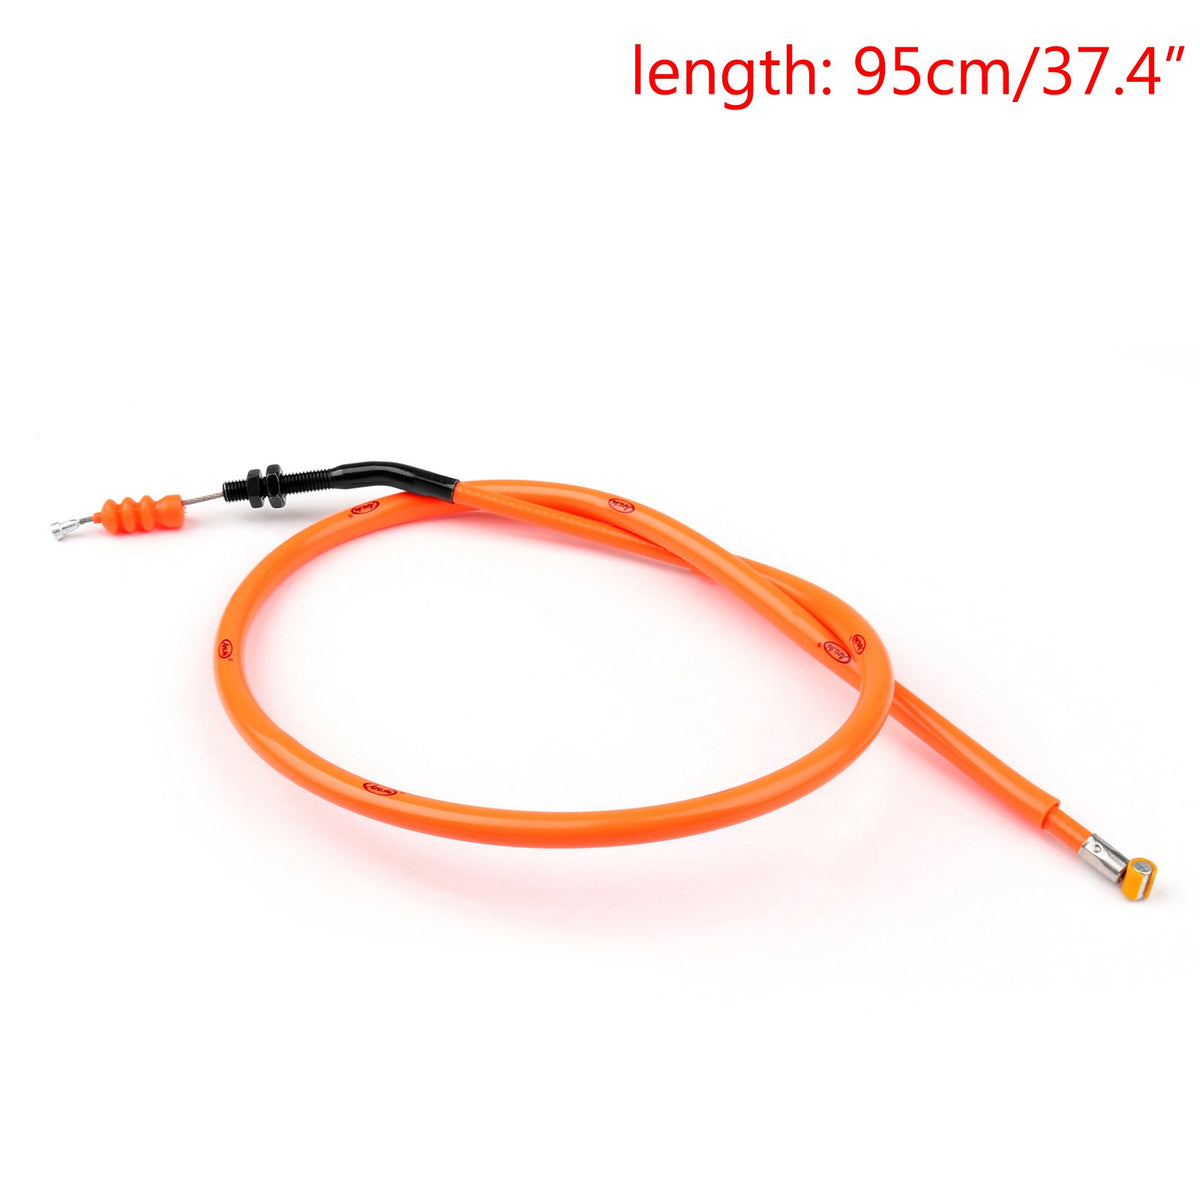 Wire Steel Clutch Cable Replacement For Kawasaki Z800 2013 2014 2015 2016 Orange